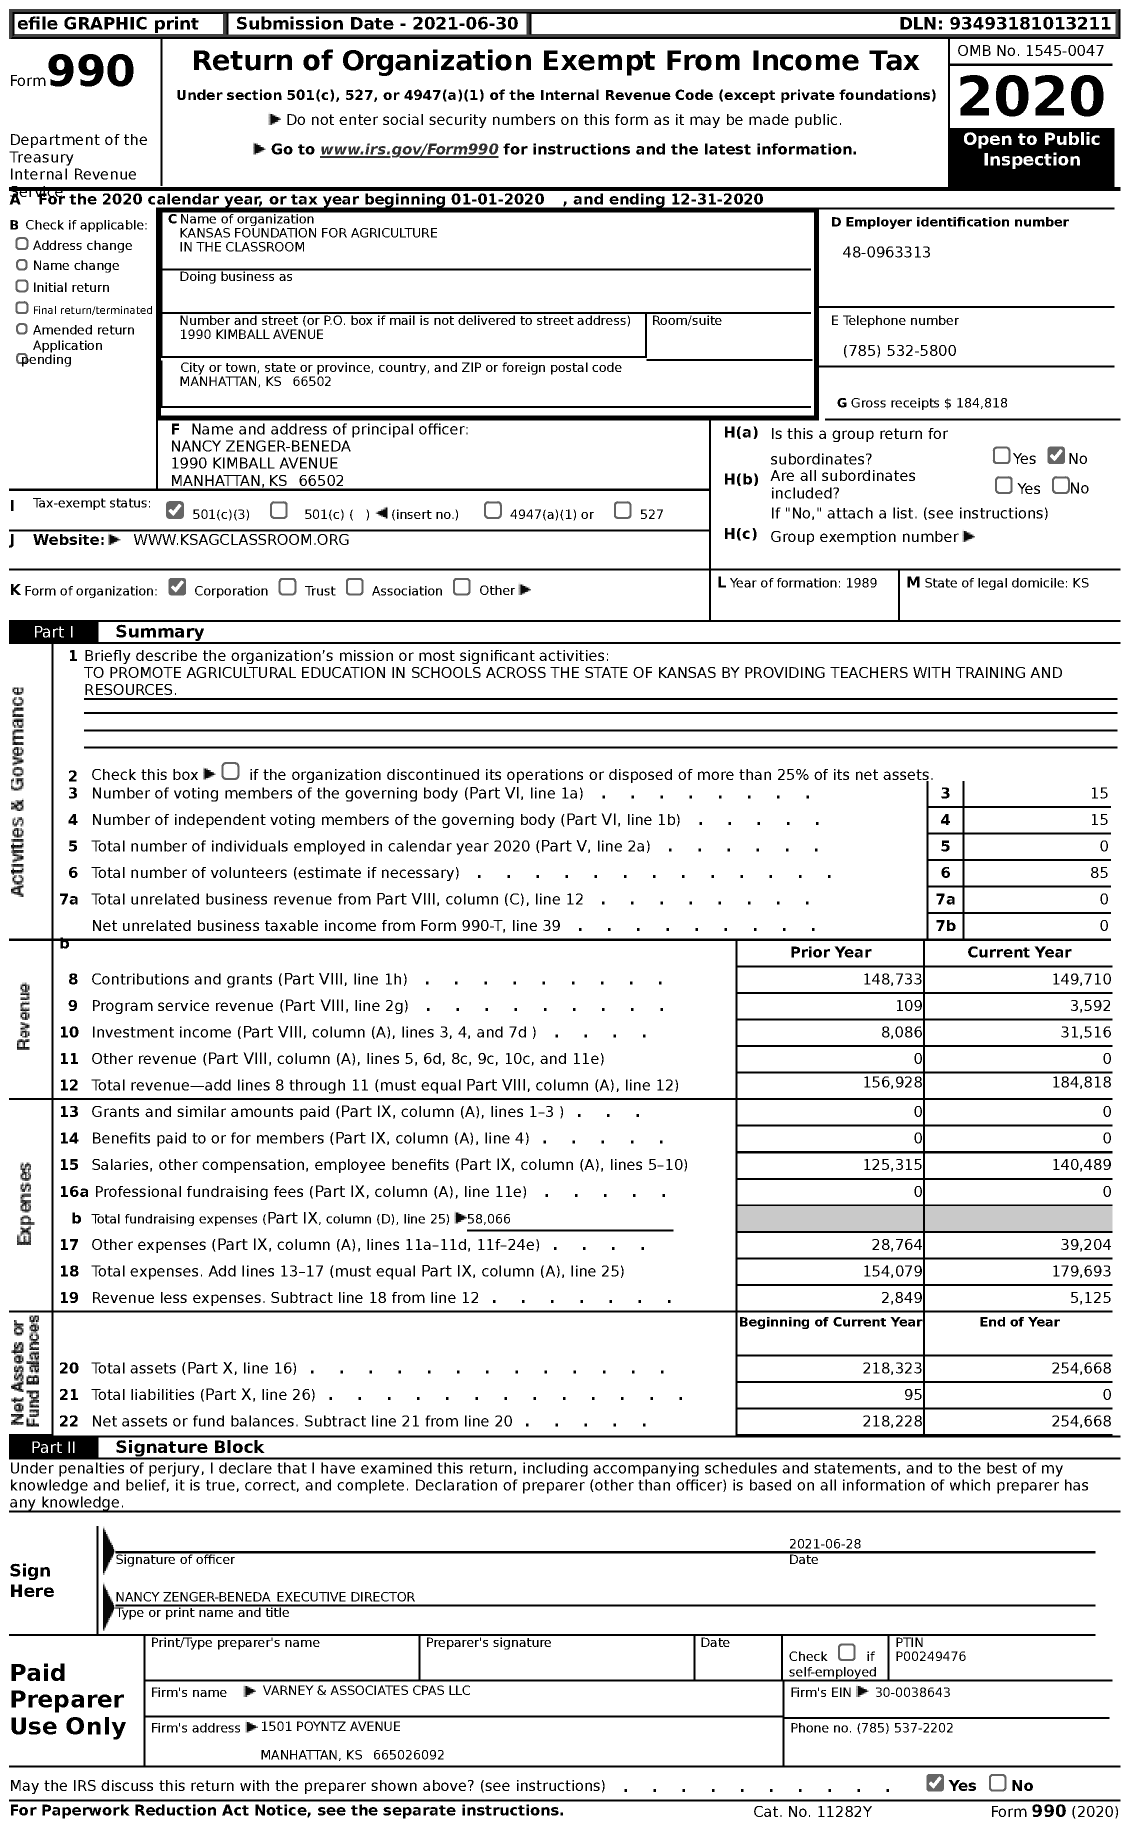 Image of first page of 2020 Form 990 for Kansas Foundation for Agriculture in the Classroom